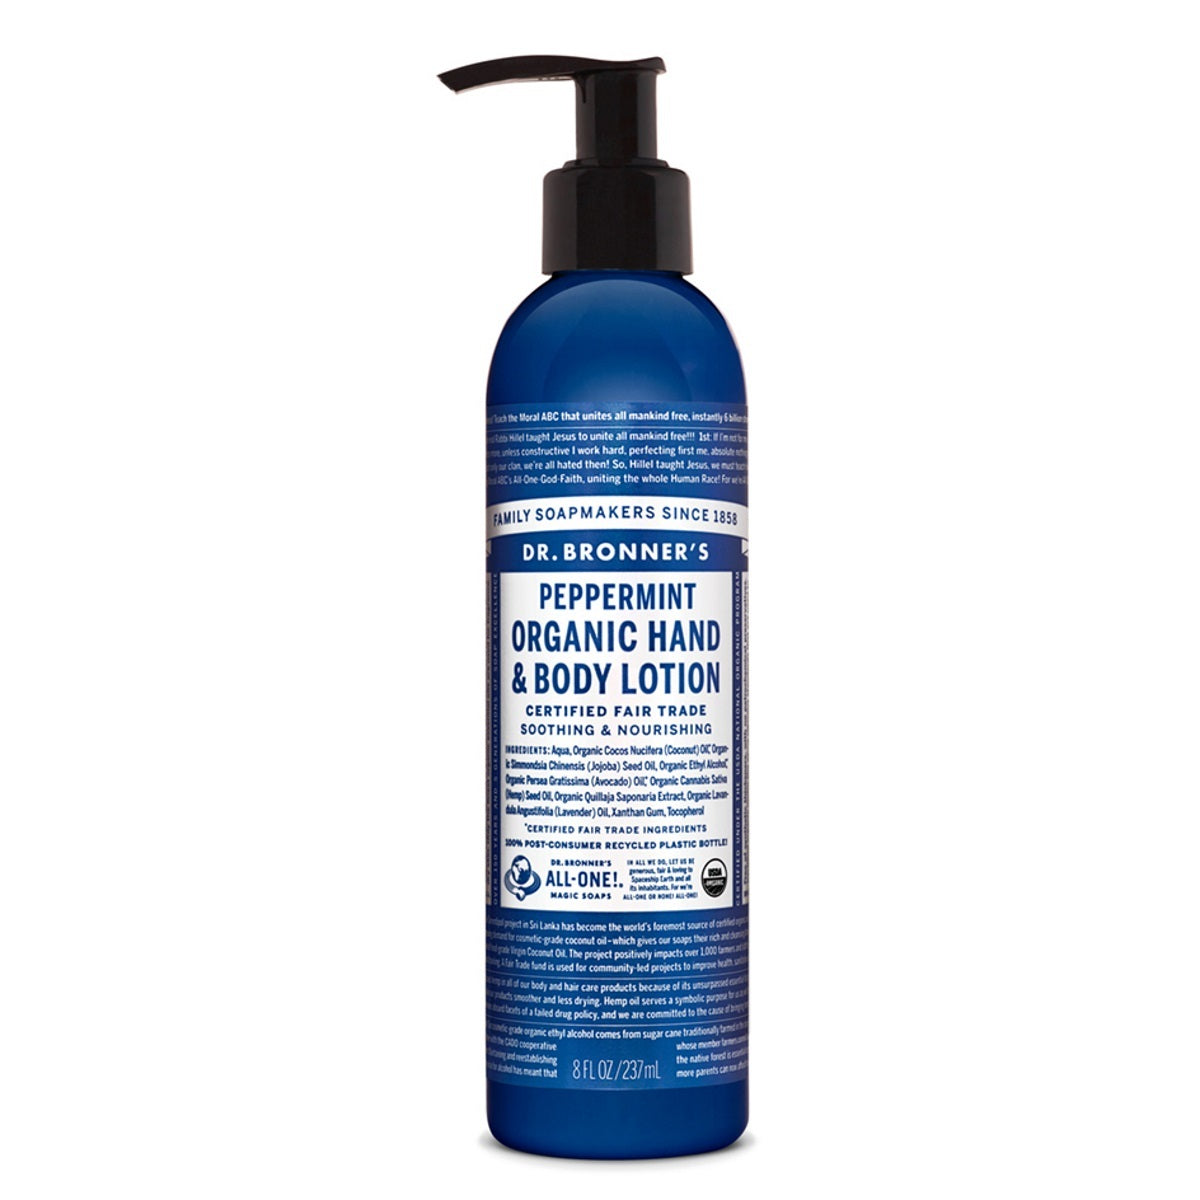 Primary image of Peppermint Organic Hand  Body Lotion